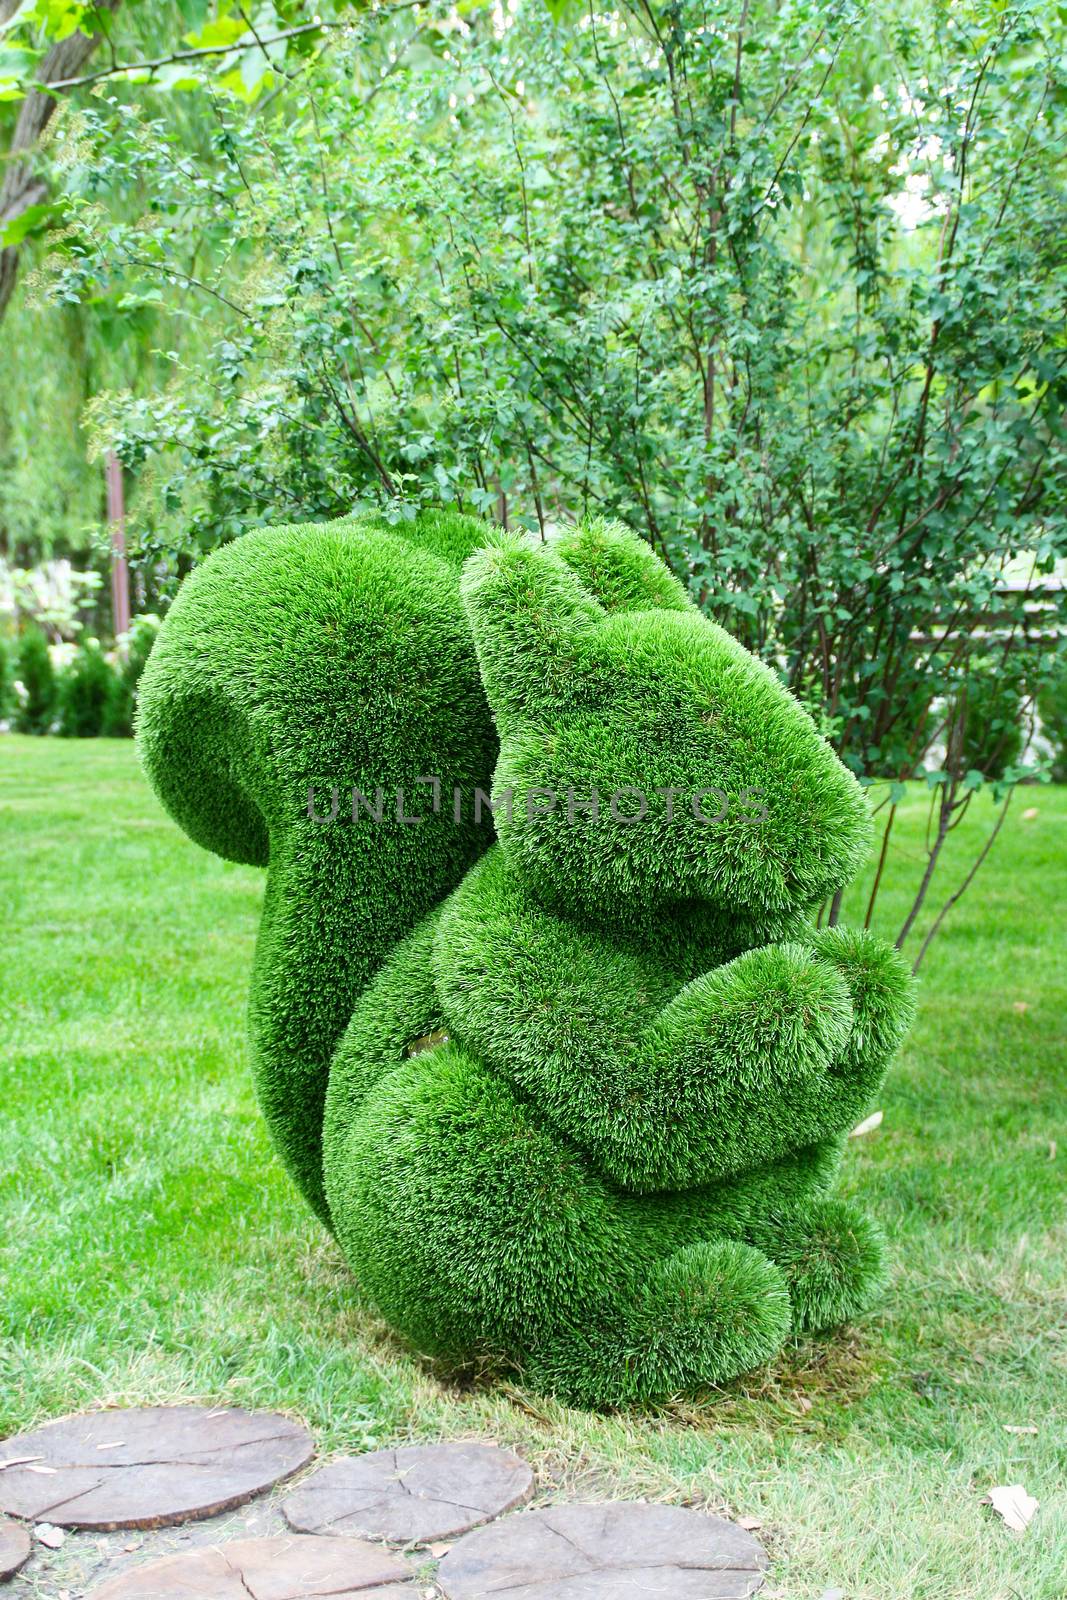 Green sculpture squirrels in the background trees. by Igor2006